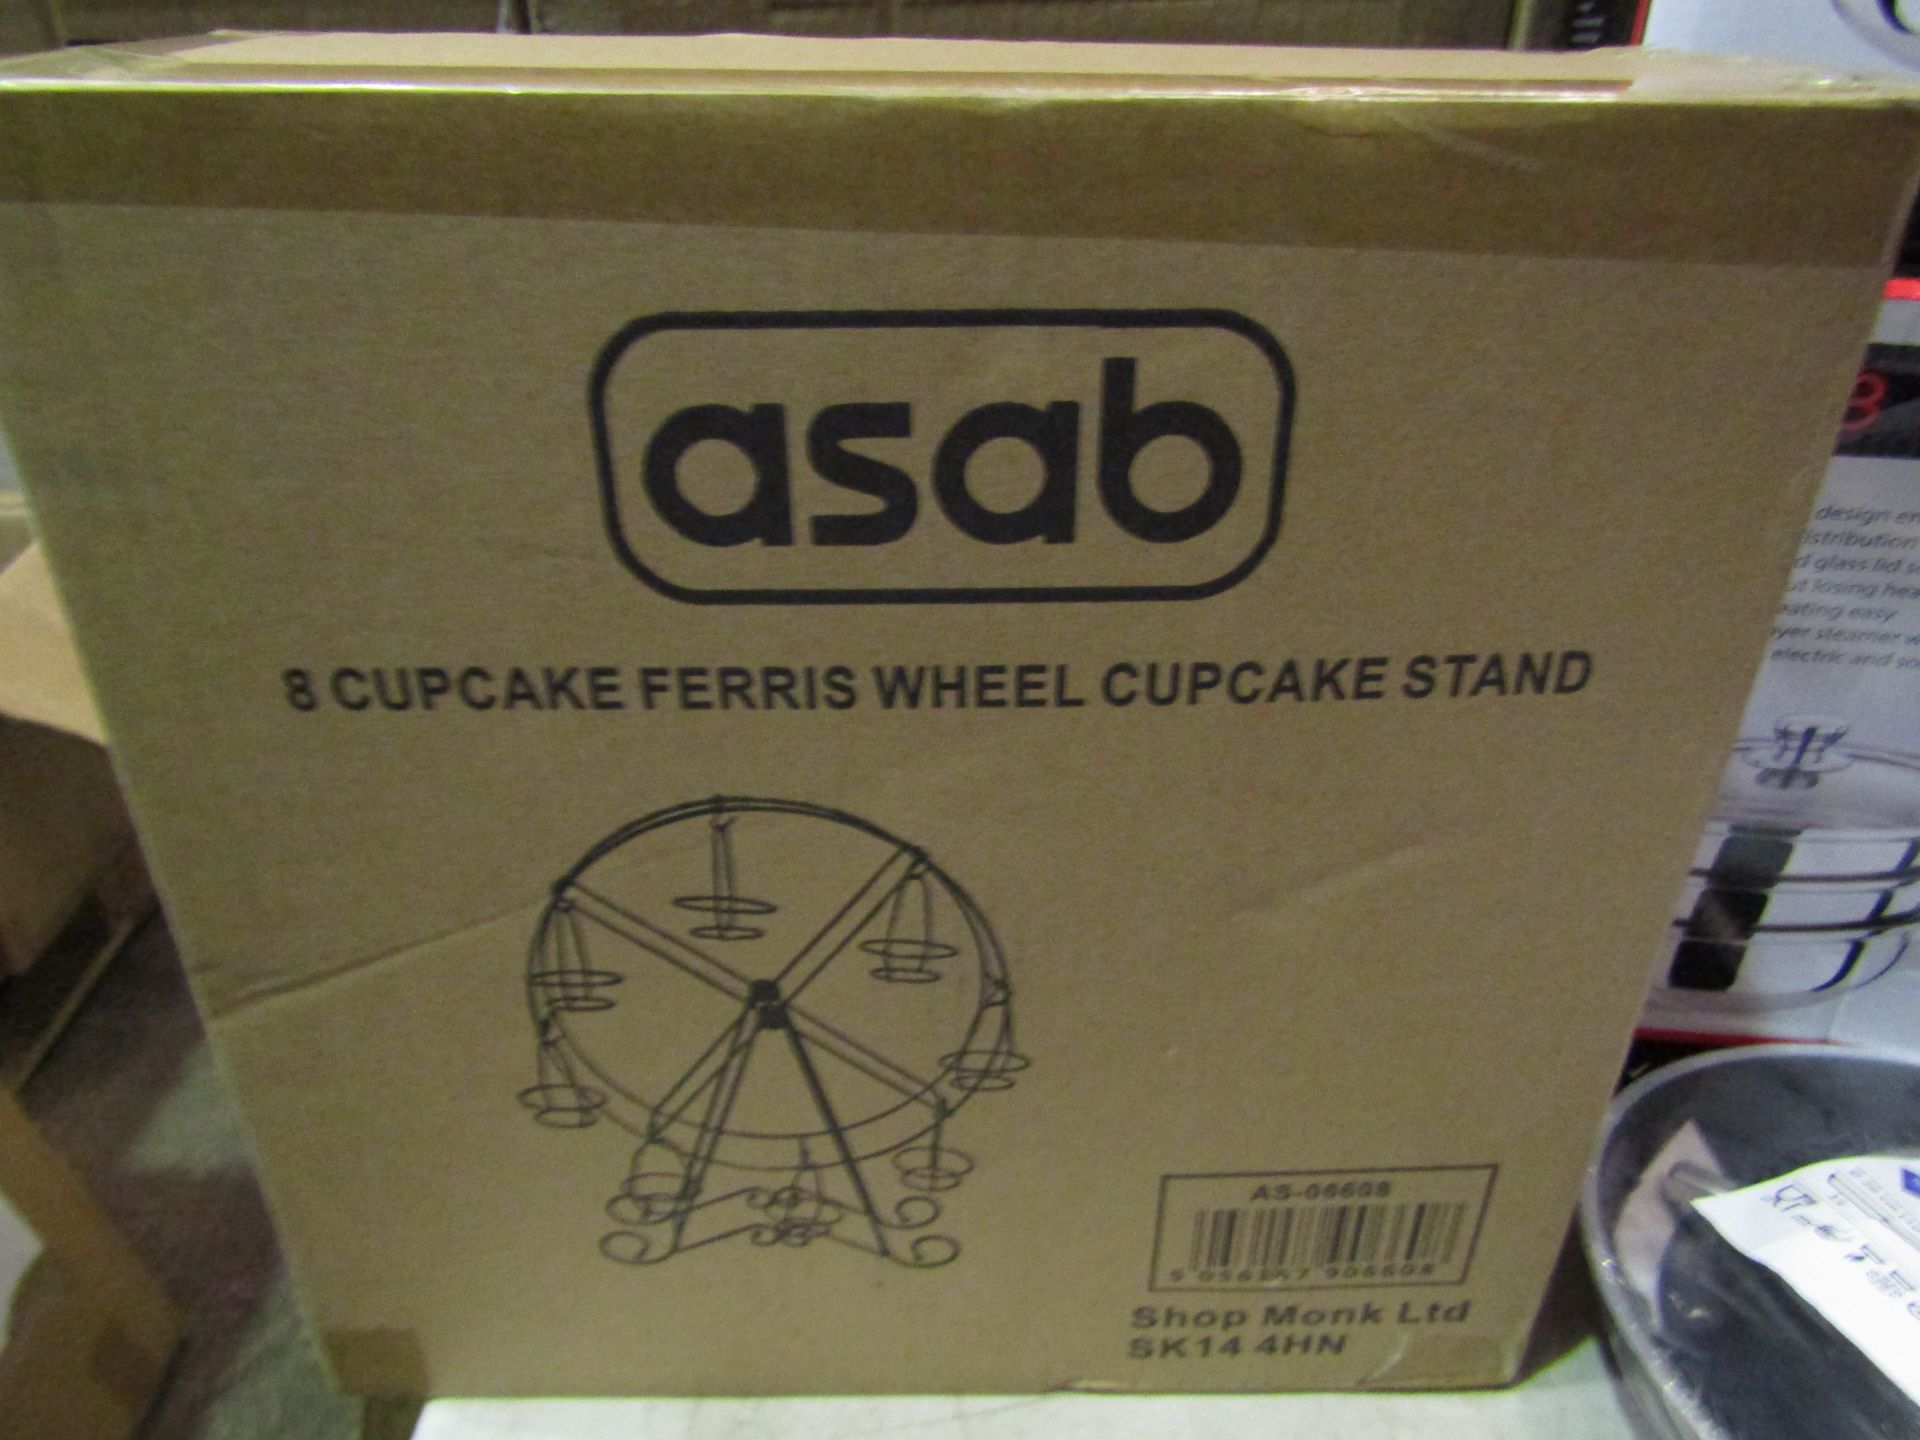 Asab 8 Cupcake Ferris Wheel Cupcake Stand - Unchecked & Boxed.